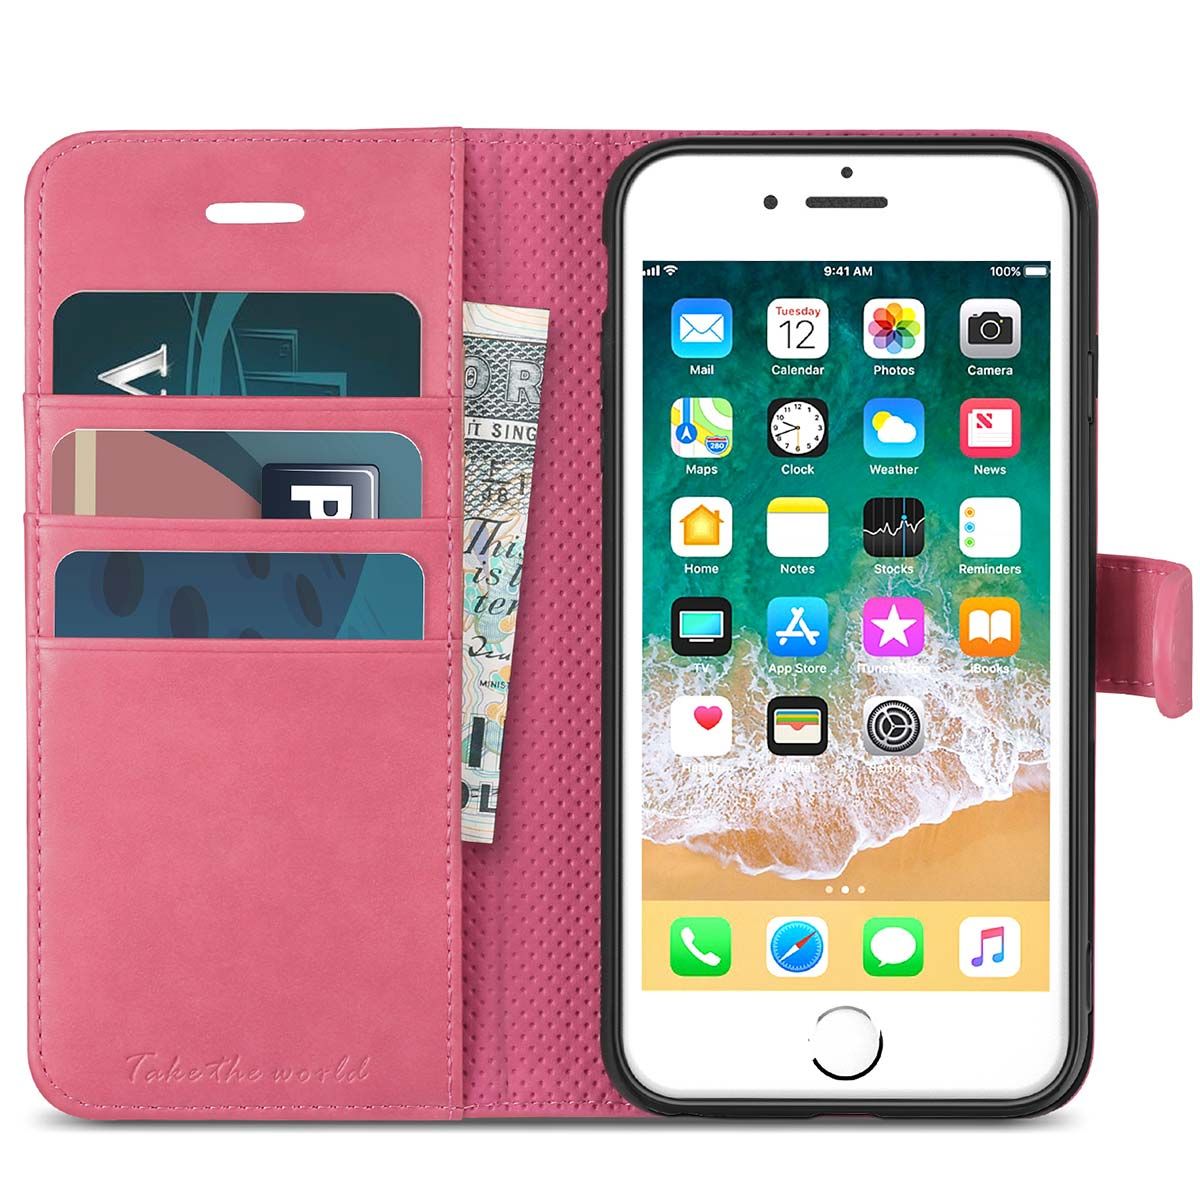 huilen limoen domein TUCCH iPhone 6s/6 Case, Stand Holder and Magnetic Closure, Flip Folio Wallet  Case